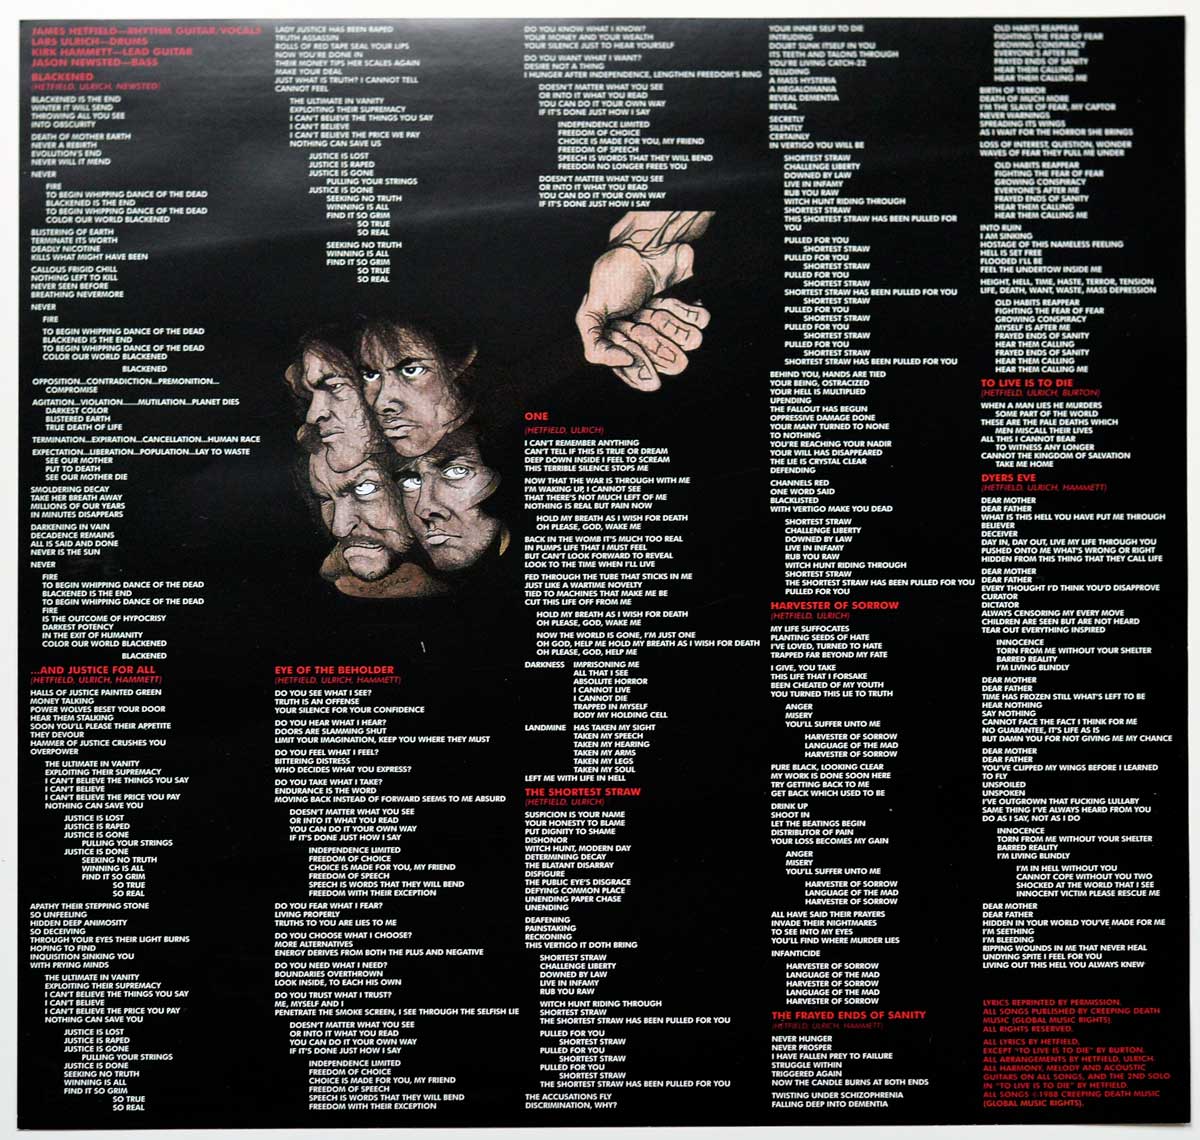 Photo of album back cover METALLICA - And Justice For All Blackened Records 180Gr Vinyl 